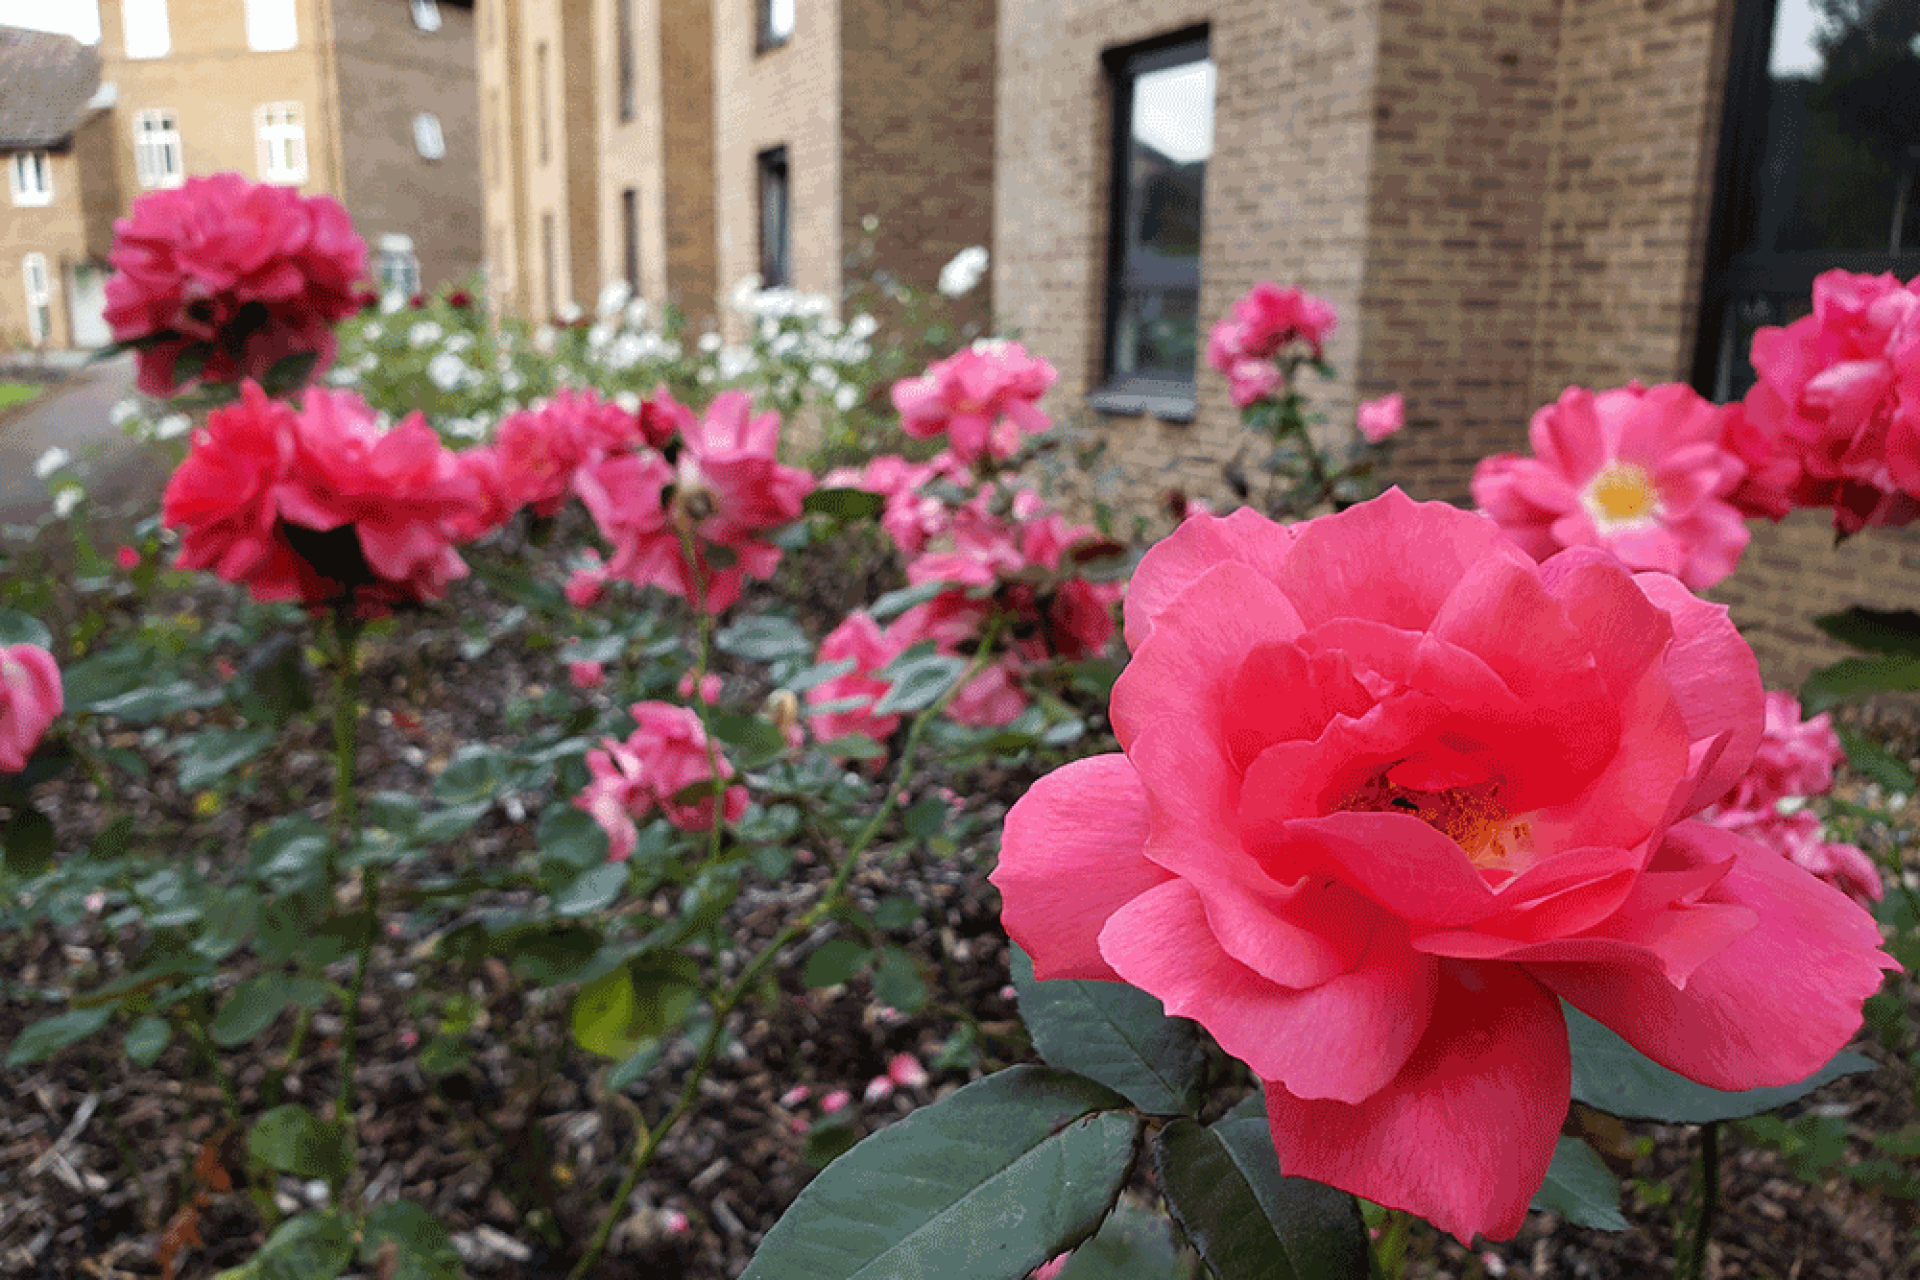 Roses and a building in the background.